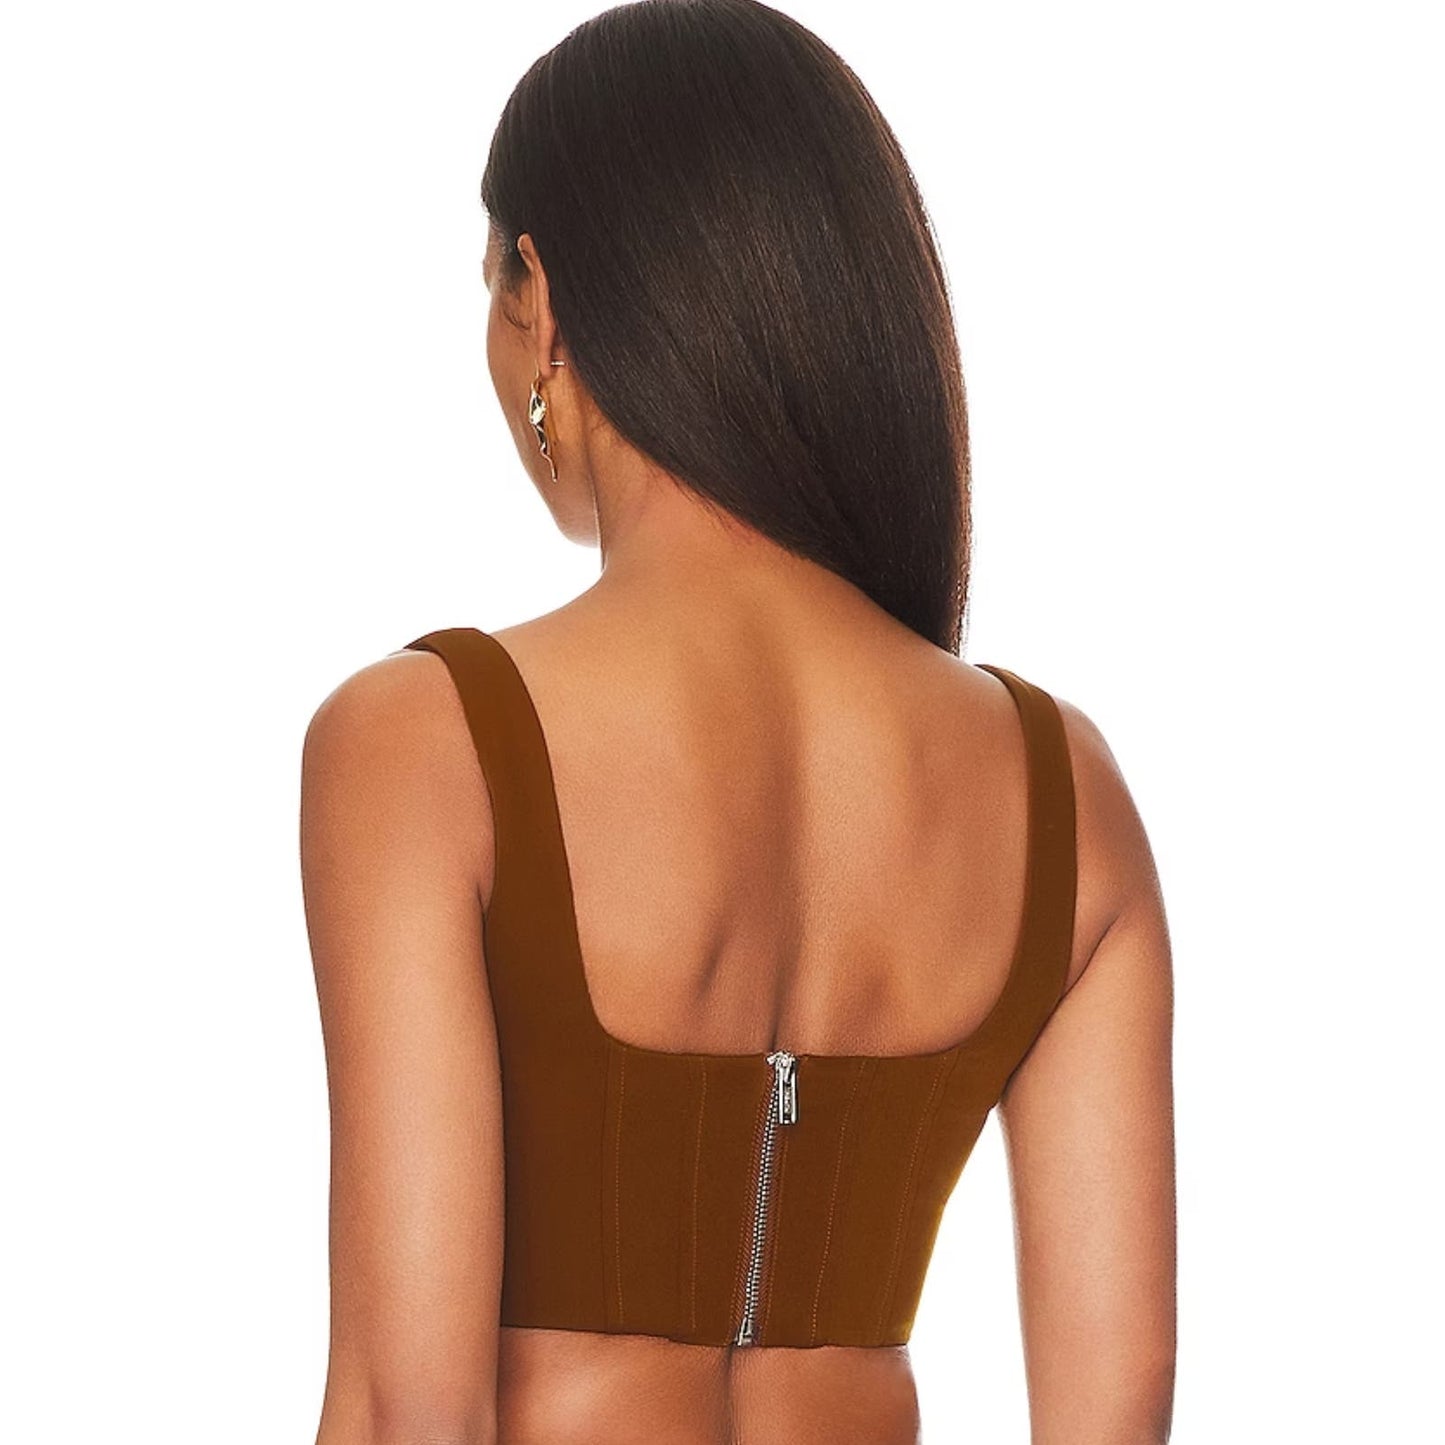 Lovers and Friends Christelle Top in Mocha Brown NWT Size Small